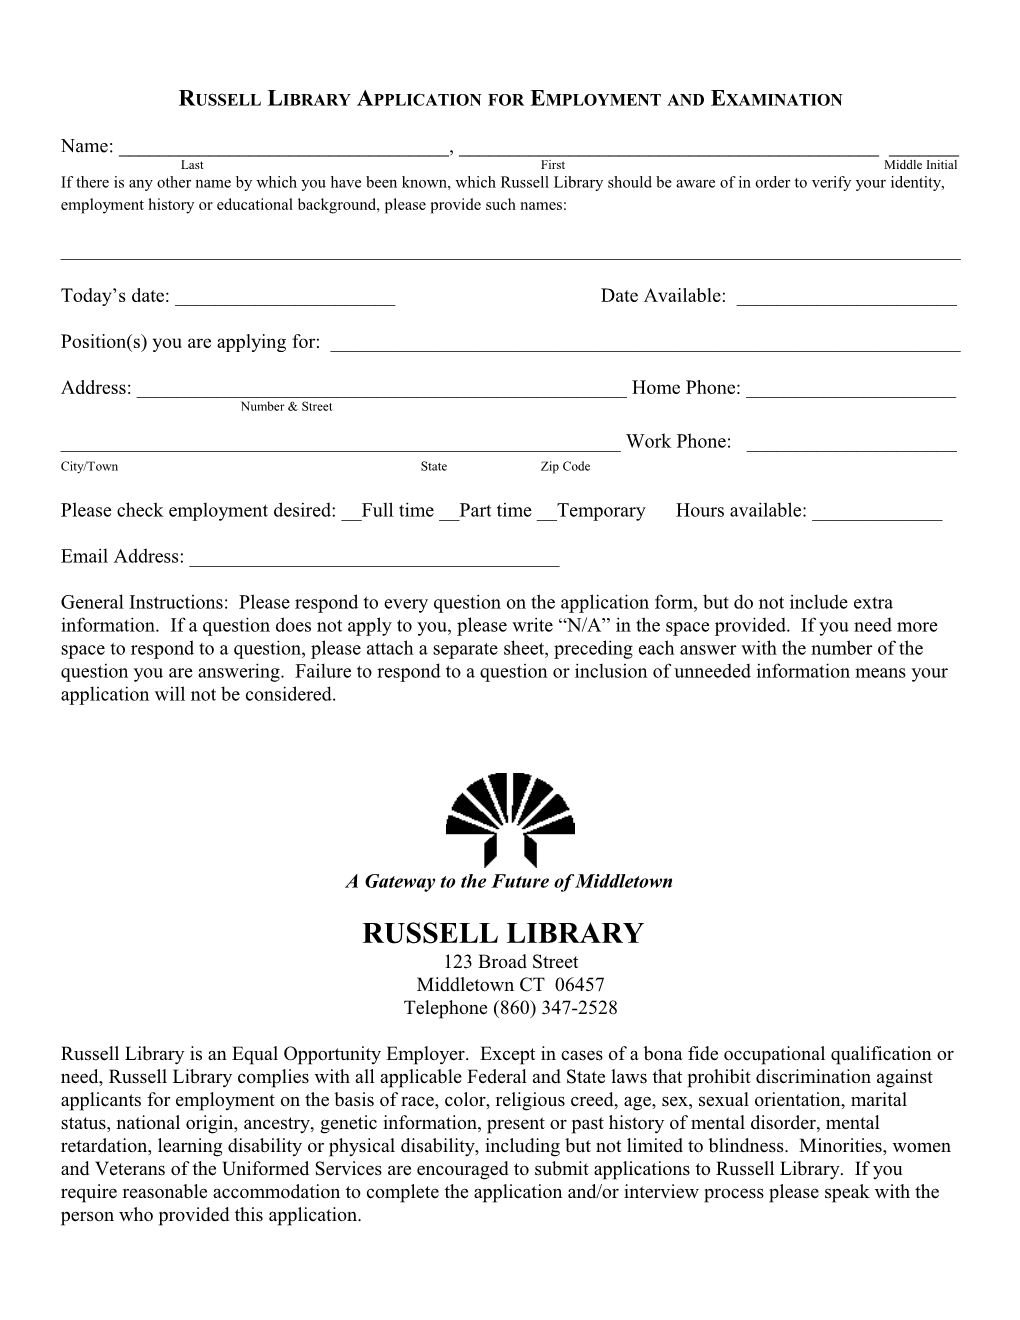 Russell Library Application for Employment and Examination